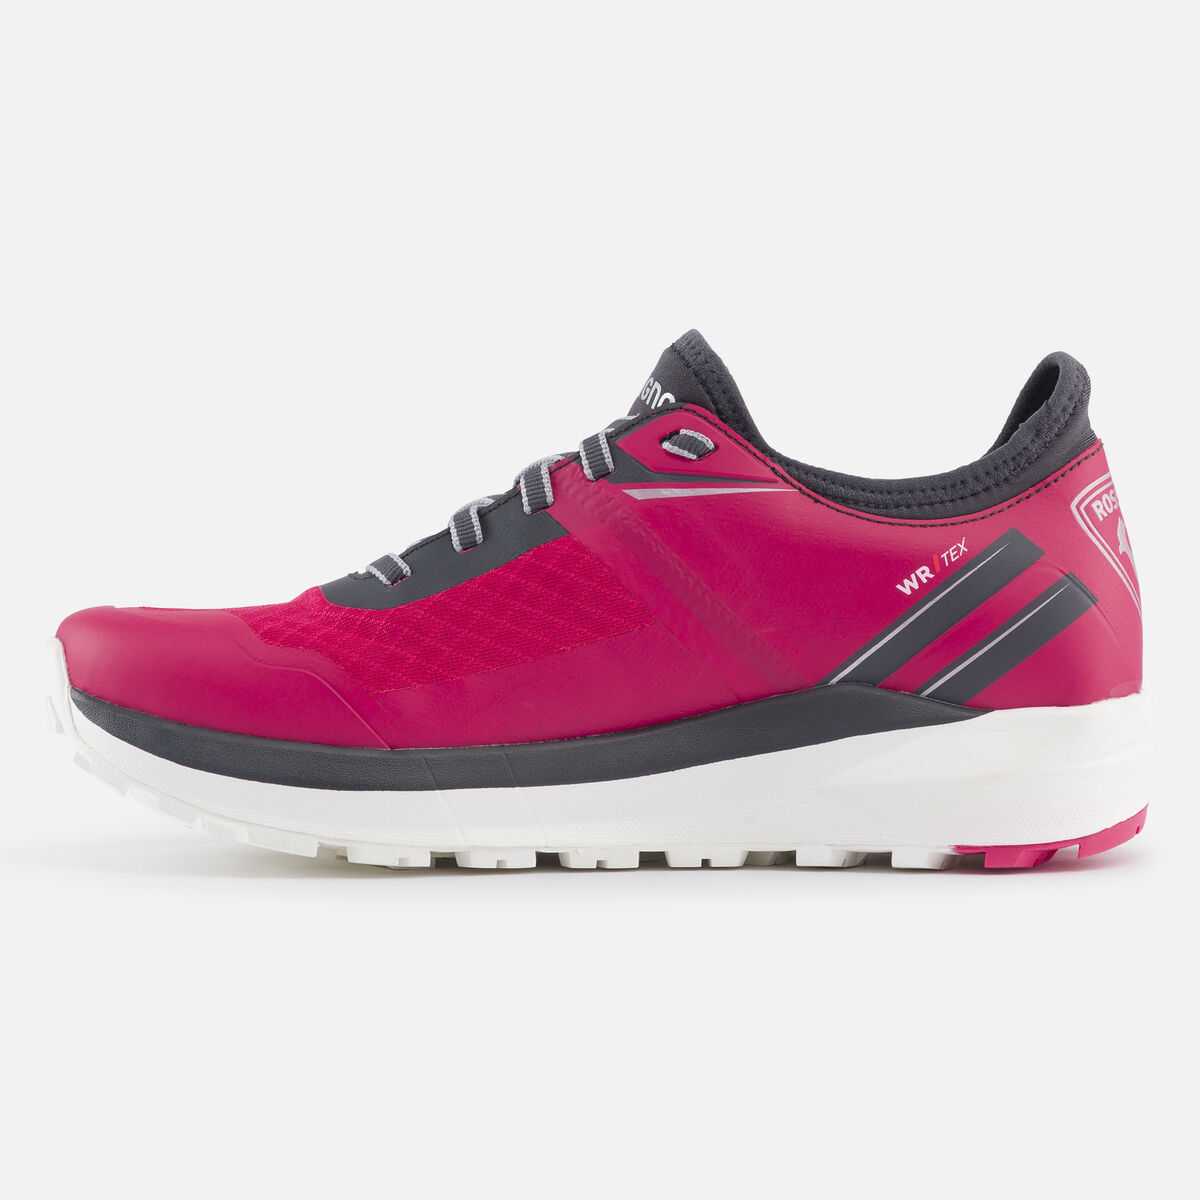 Chaussures Active outdoor imperméables roses femme